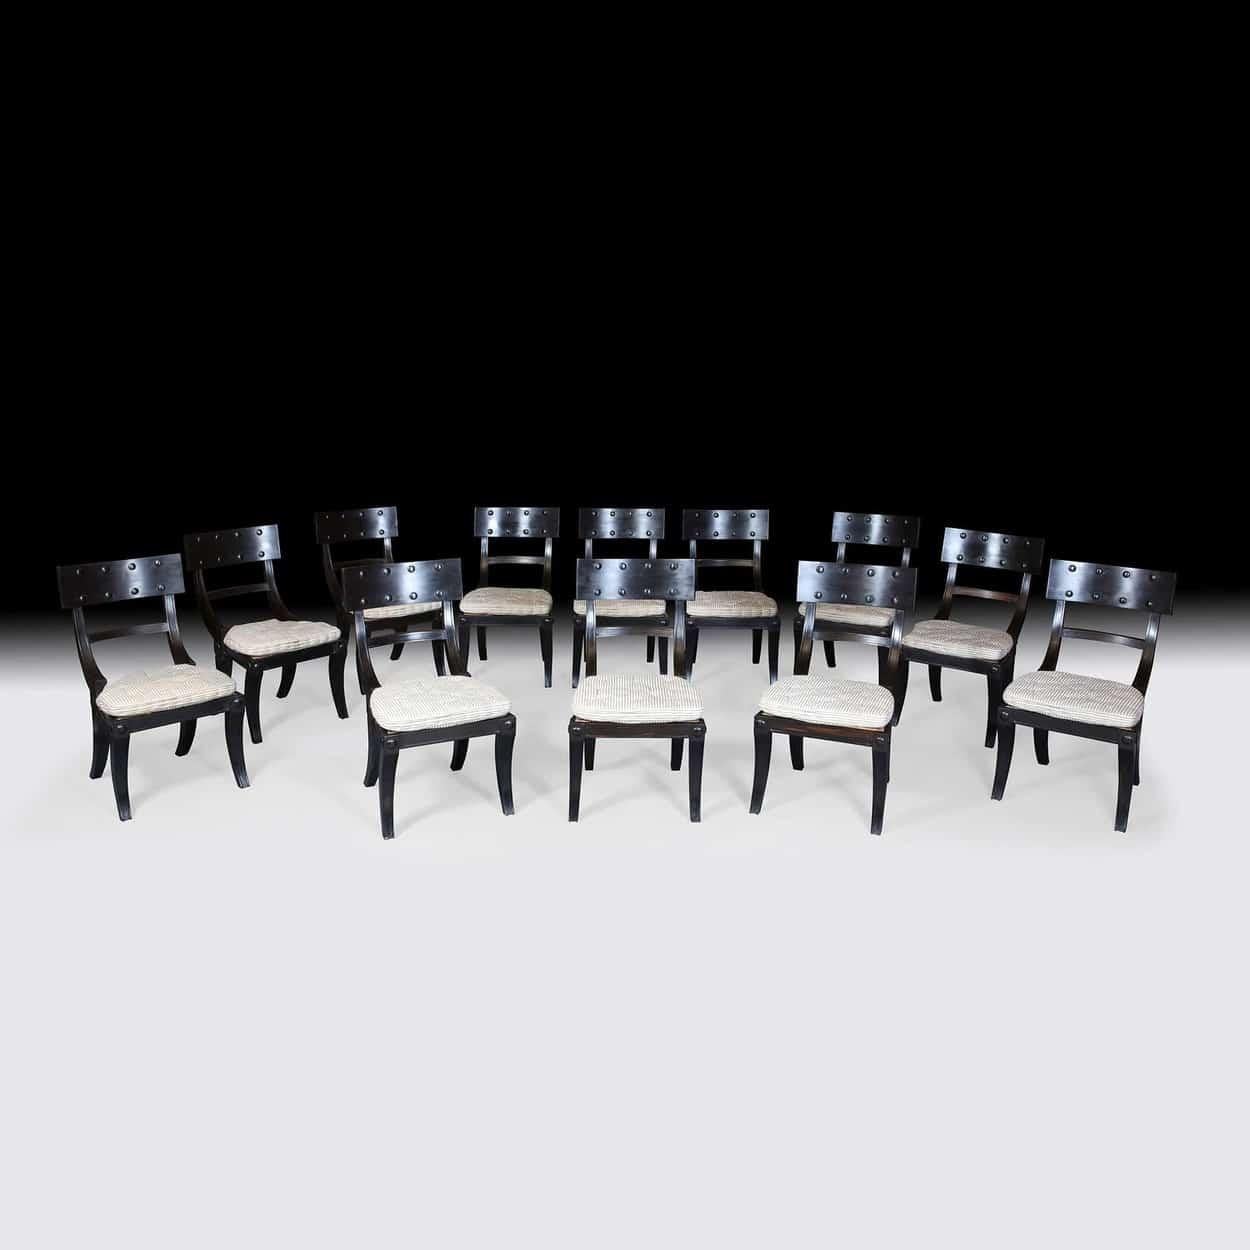 A long set of 12 solid ebony klismos dining chairs, each with handmade horsehair squab cushions.
Contemporary production

Measures: Seat height includes 2inch horse hair cushion, 18 inches
Seat width 18.5in
Height of back 35in.

  